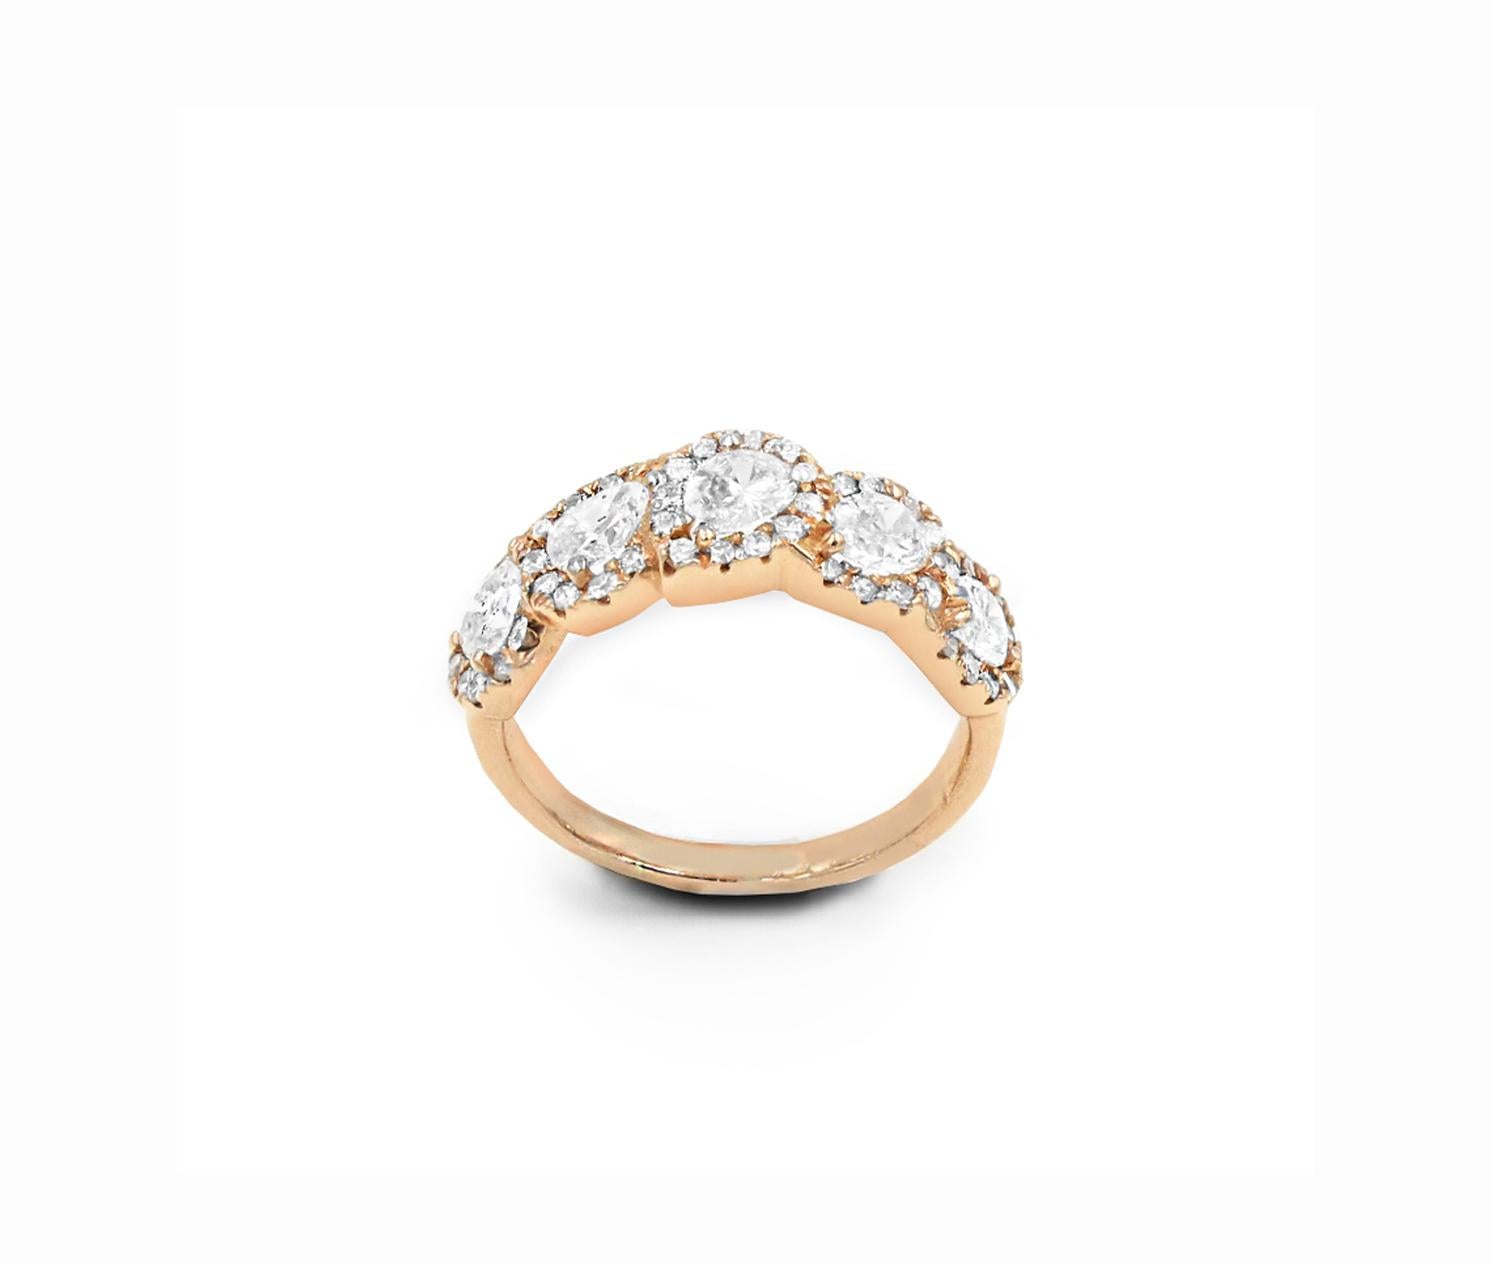 Ladies gorgeous 5 stone diamond band .
5 Pear shaped diamonds 1.33 carat total weight, VS2 SI1 G-H color.
Surrounded halo .60 carat round brilliant cut diamonds.
This unique ring is handcrafted in 14k light rose gold.
The Dazzling diamonds are